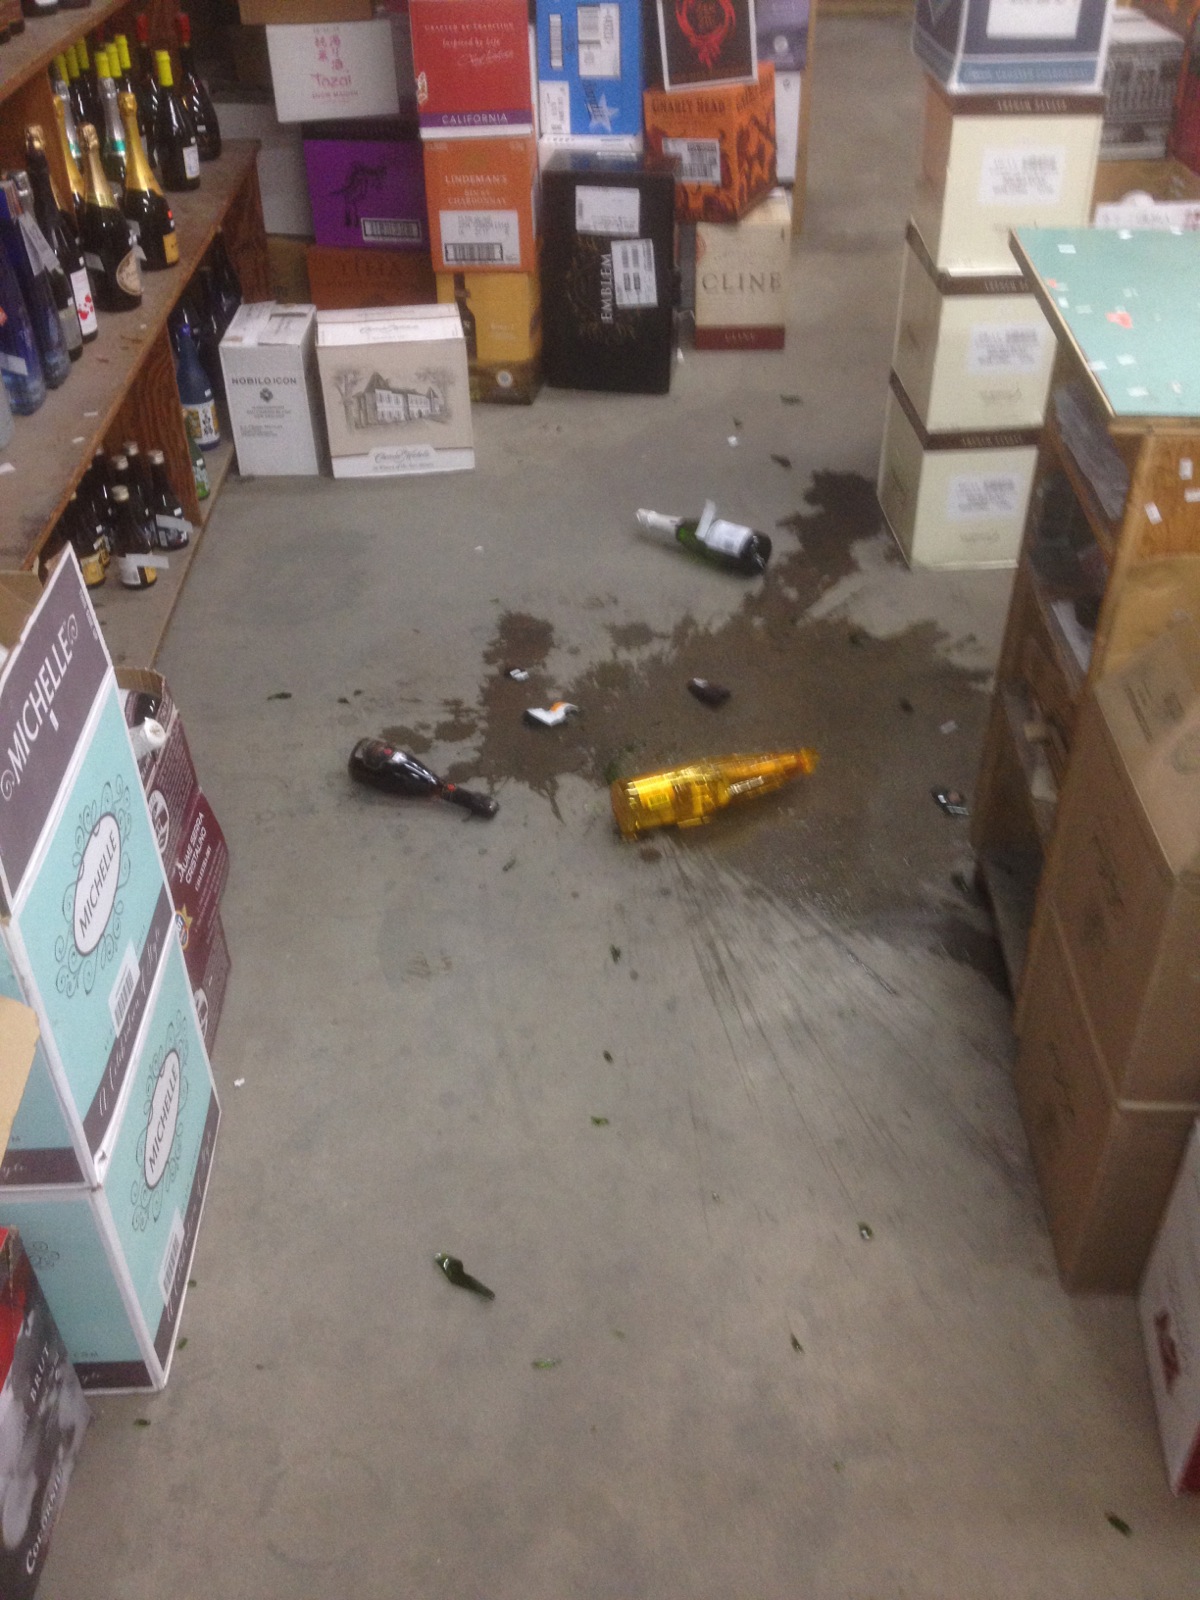 A $300 bottle of Cristal champagne fell off a shelf at the Grog Shop, but miraculously was unbroken.-Photo by Mel Strydom, Grog Shop